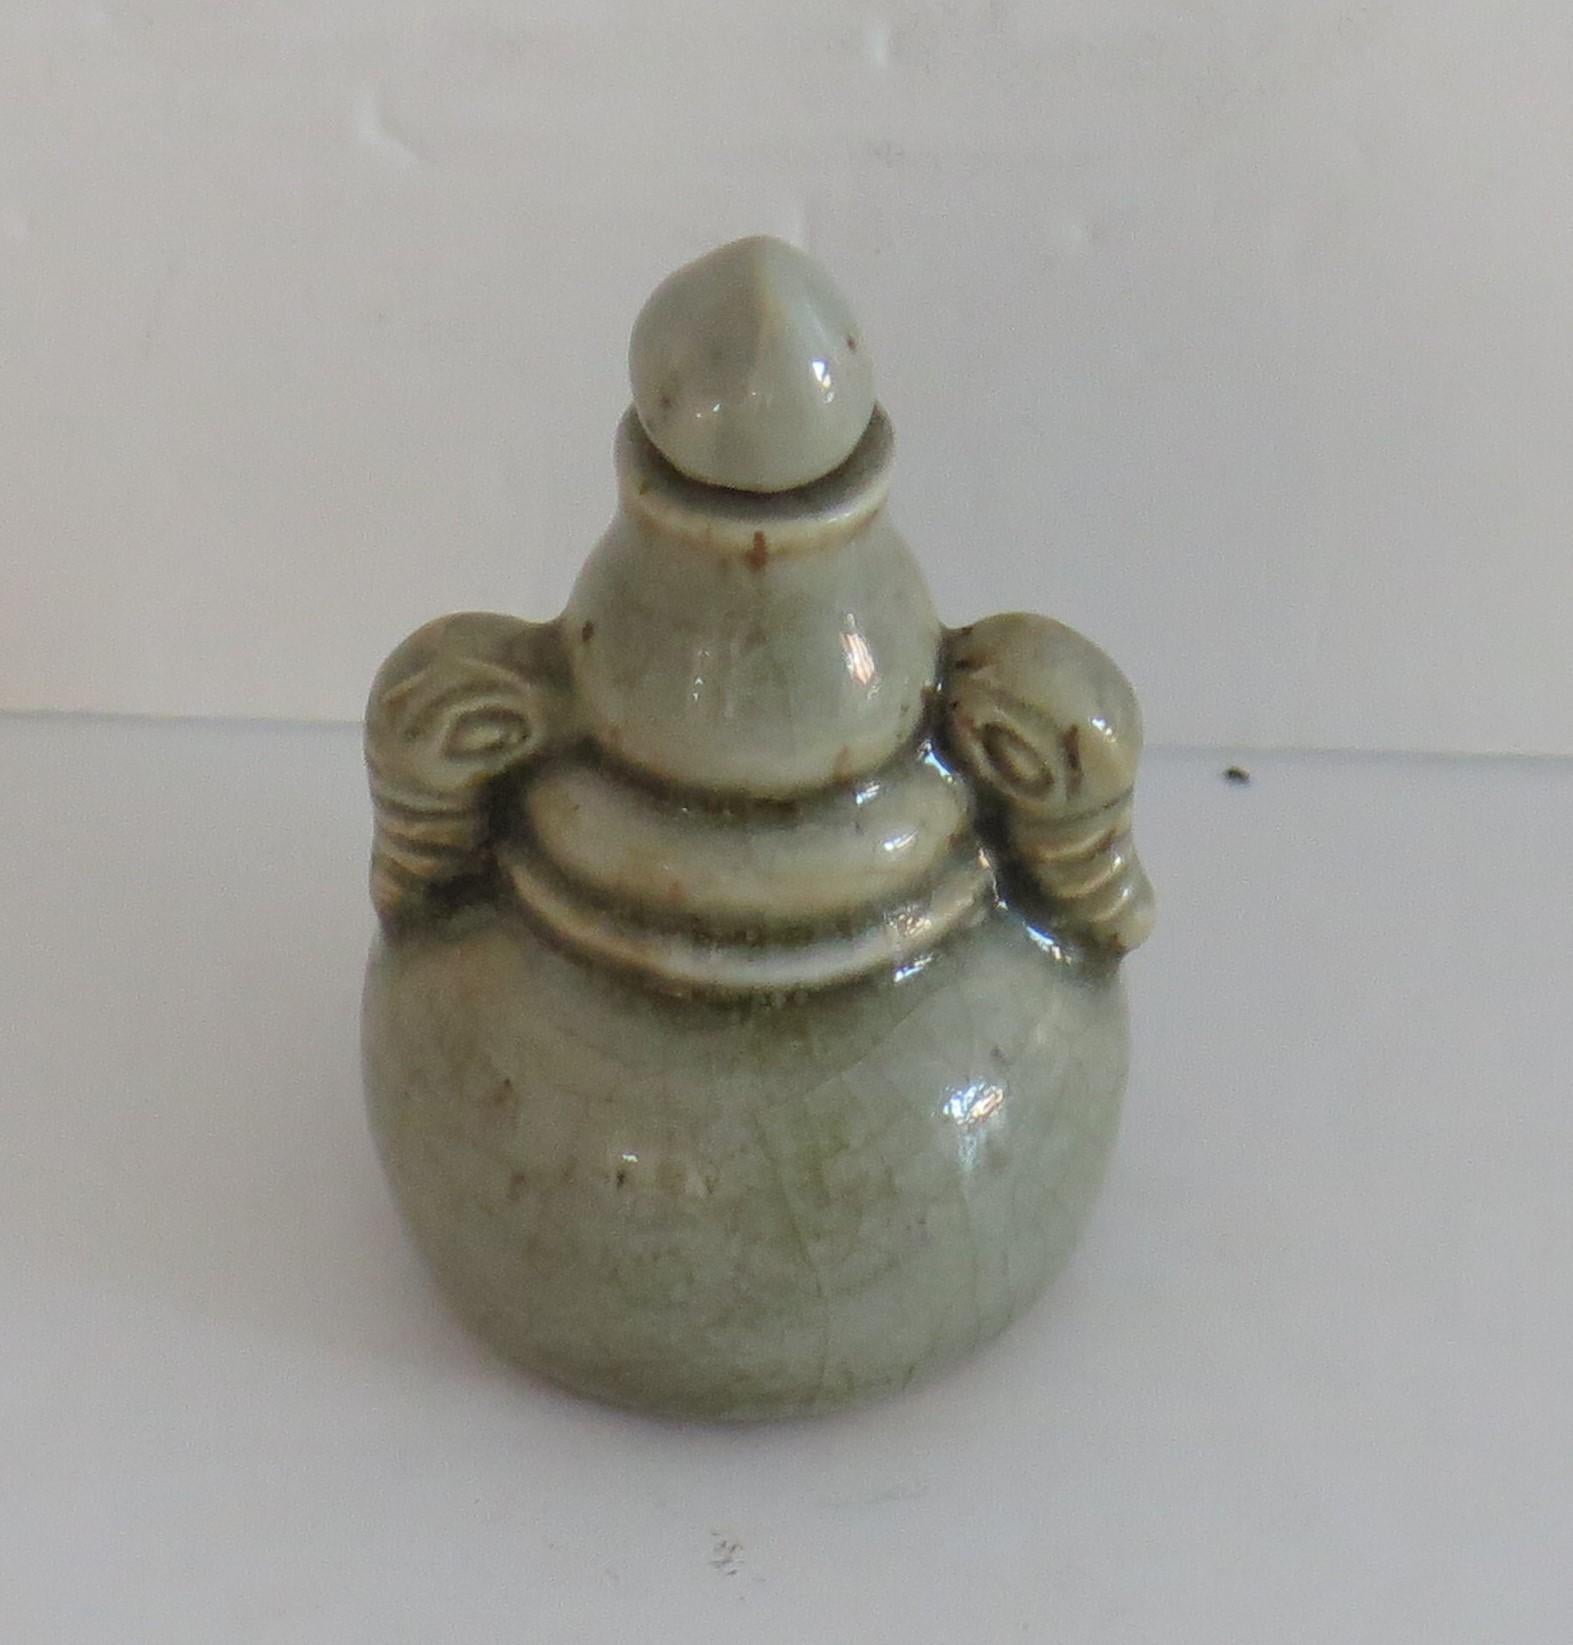 This is a very good quality Chinese porcelain snuff bottle, with a gourd shape and unusual elephant head side handles all in a celadon glaze, dating to the 18th century, Qing dynasty. 

The cylindrical bottle has a single gourd shape with two